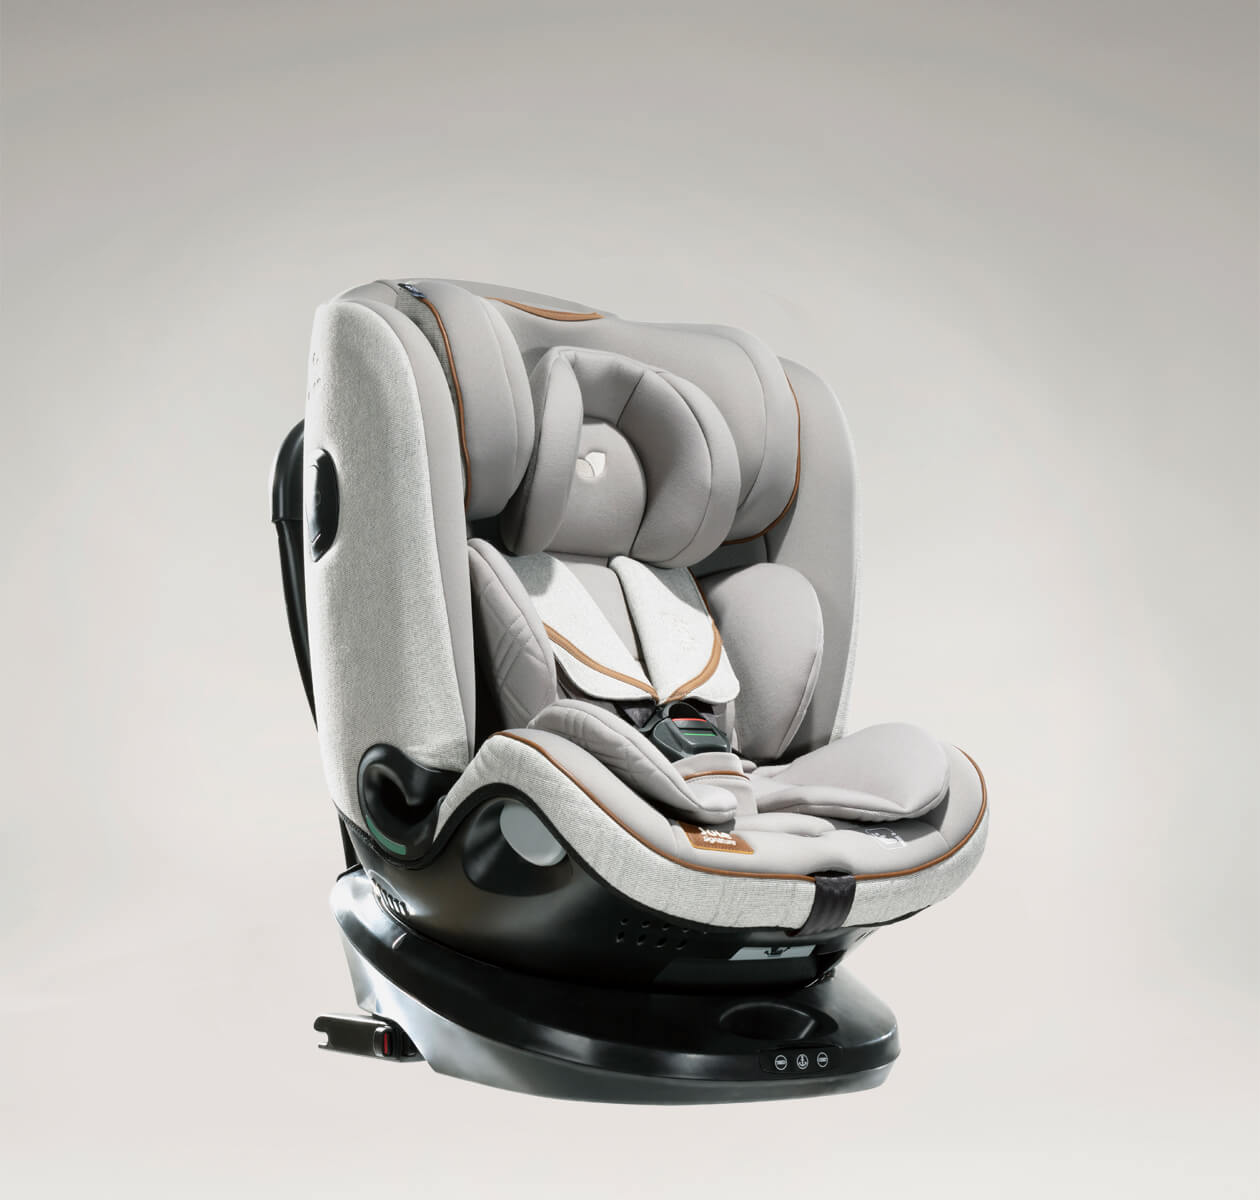 Joie i-Spin 360™  Leading i-Size Spinning Car Seat 